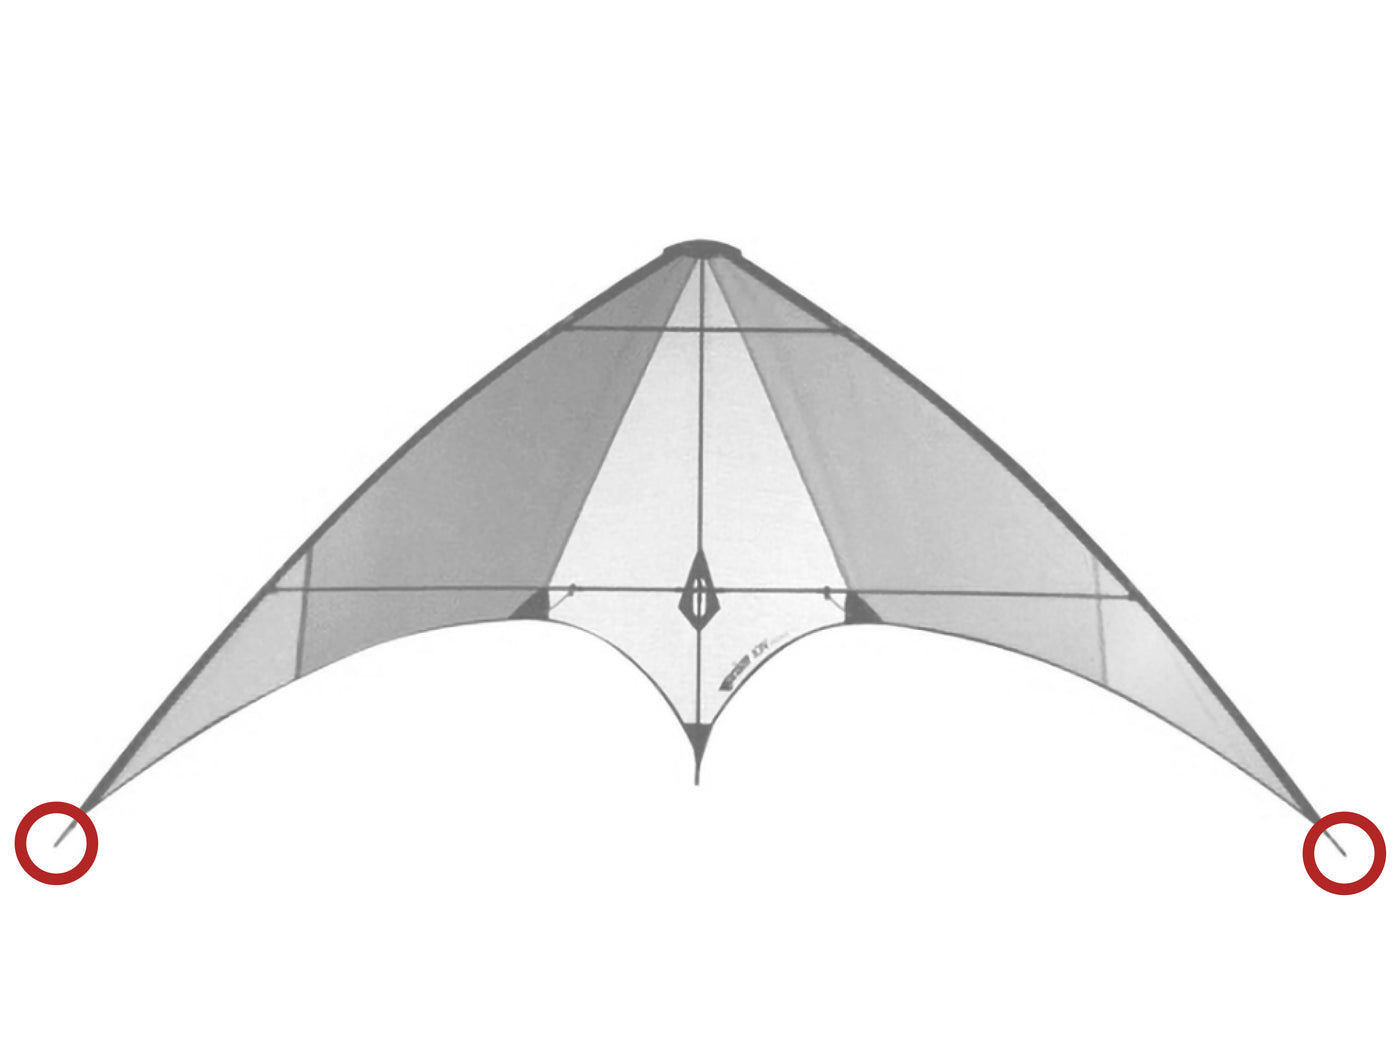 Diagram showing location of the Ion Wingtip Nocks on the kite.